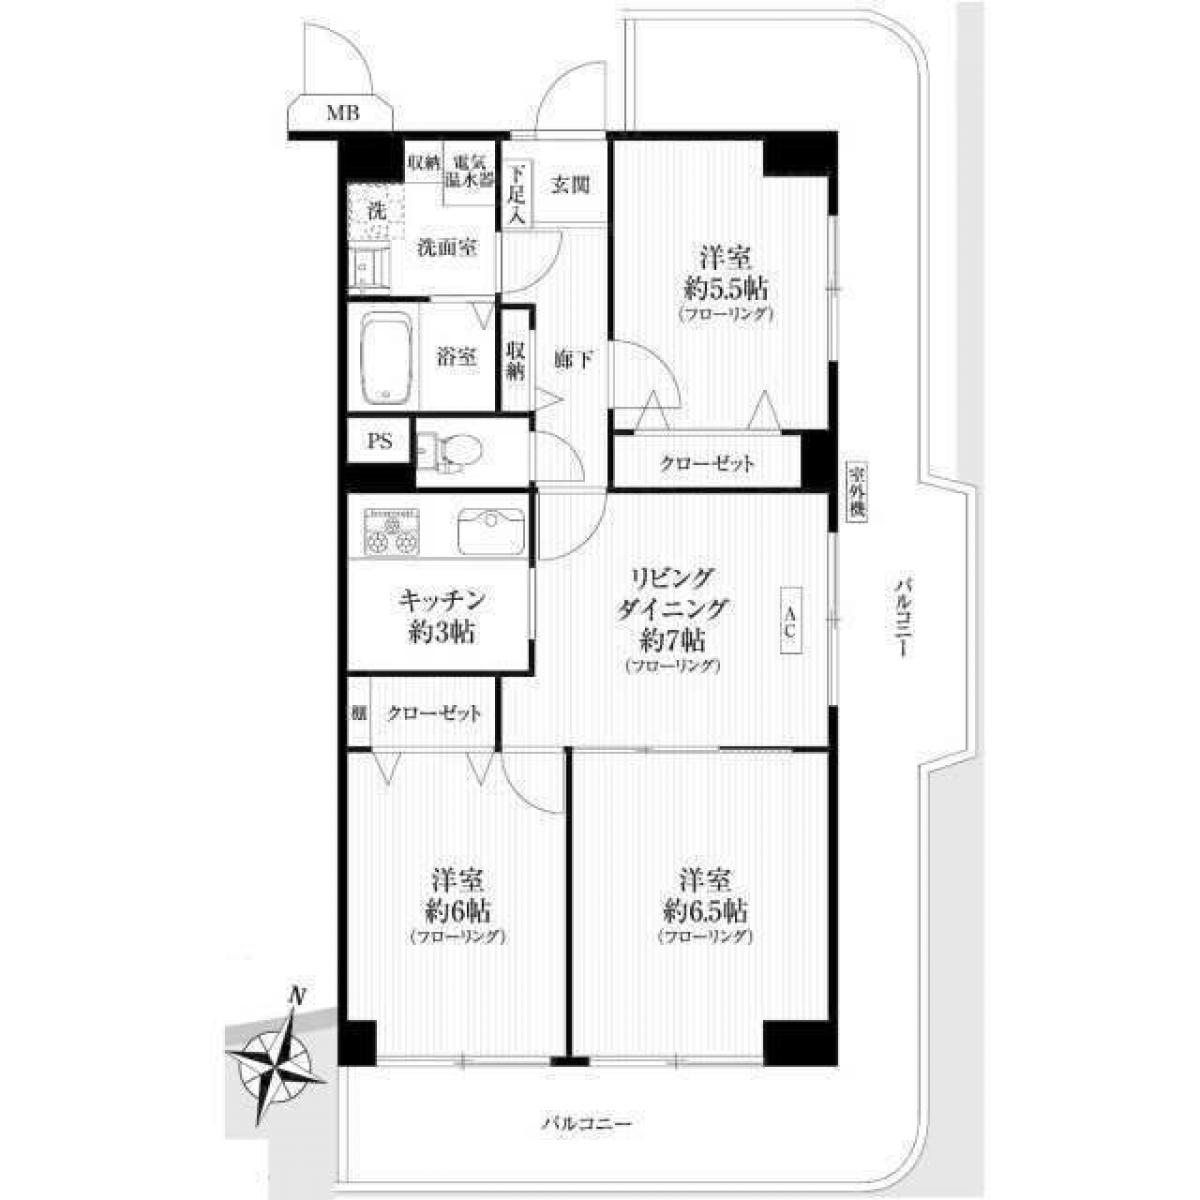 Picture of Apartment For Sale in Higashimurayama Shi, Tokyo, Japan